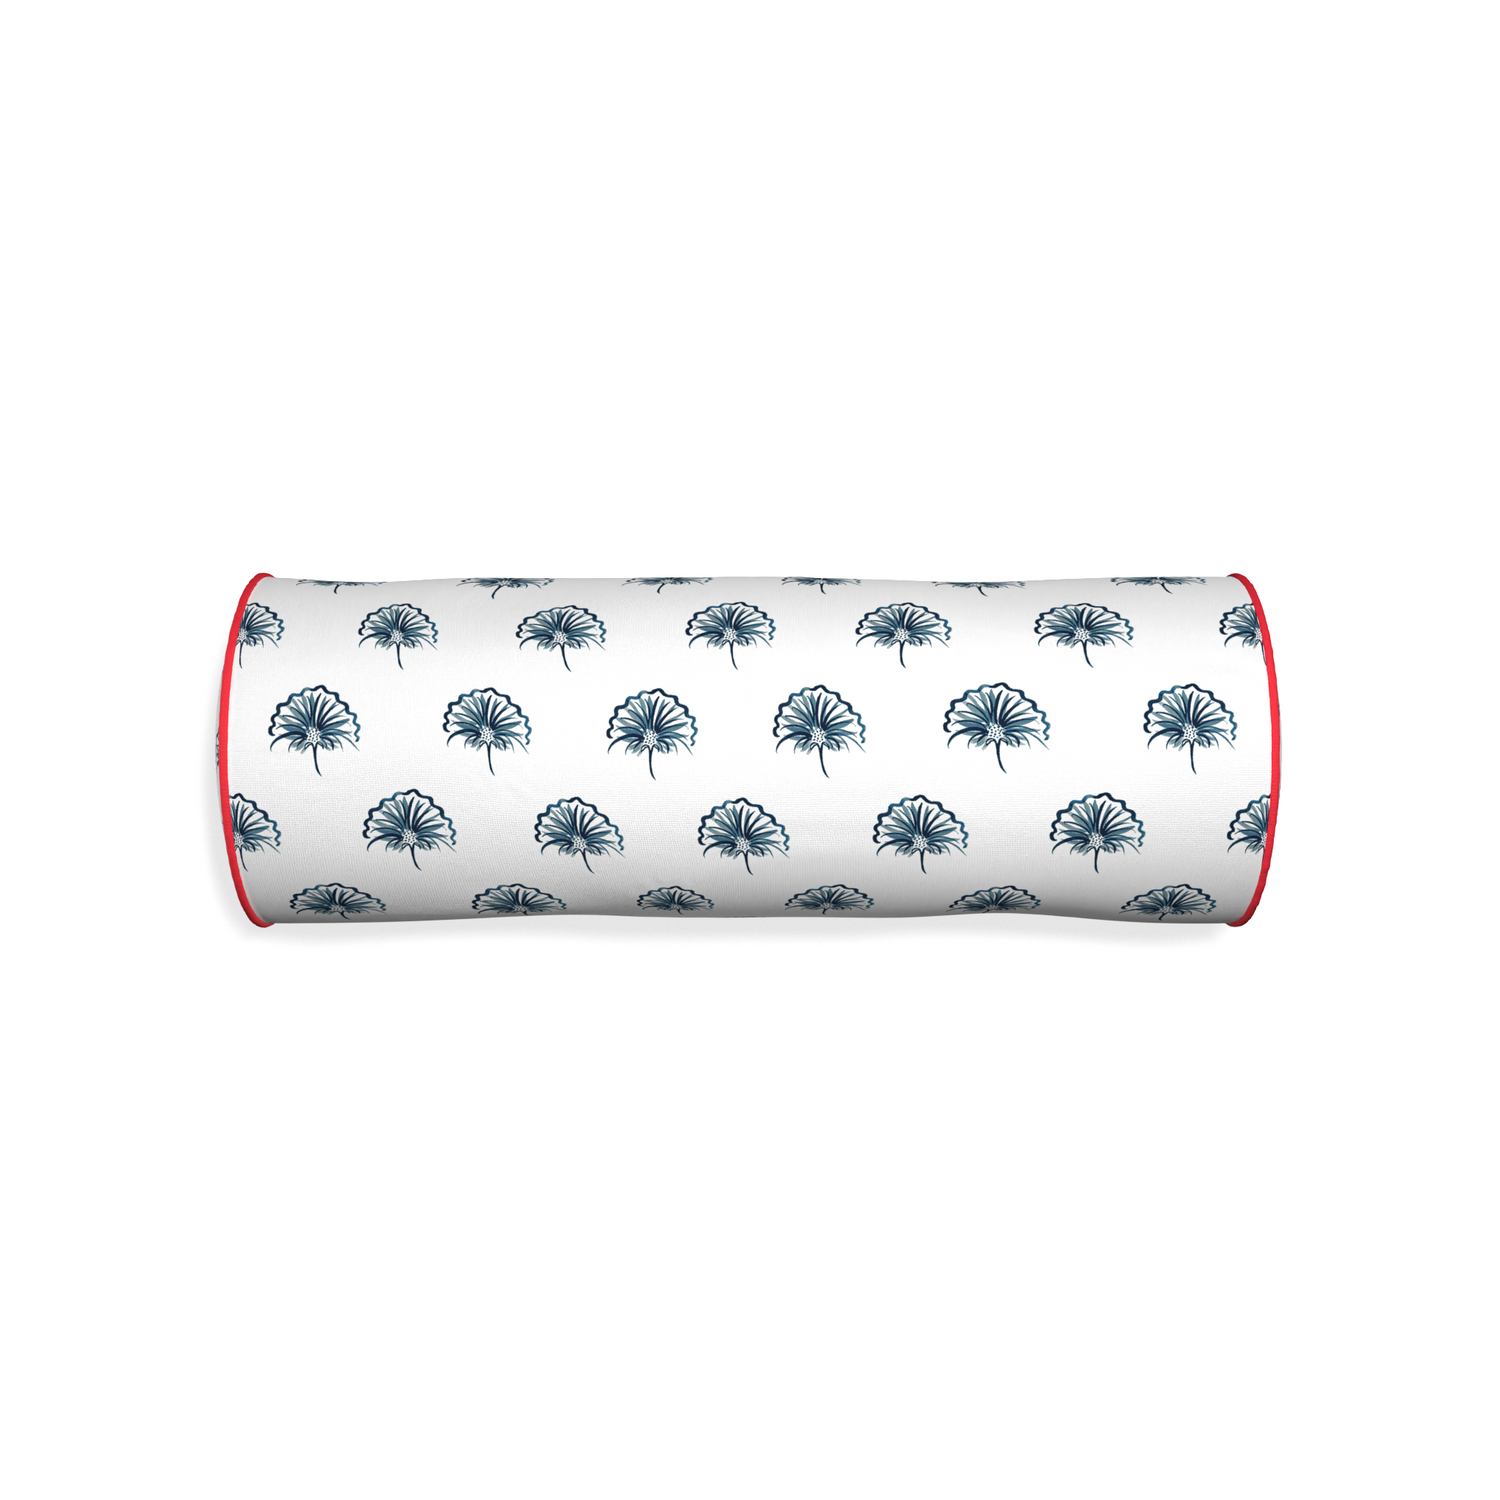 Bolster penelope midnight custom floral navypillow with cherry piping on white background